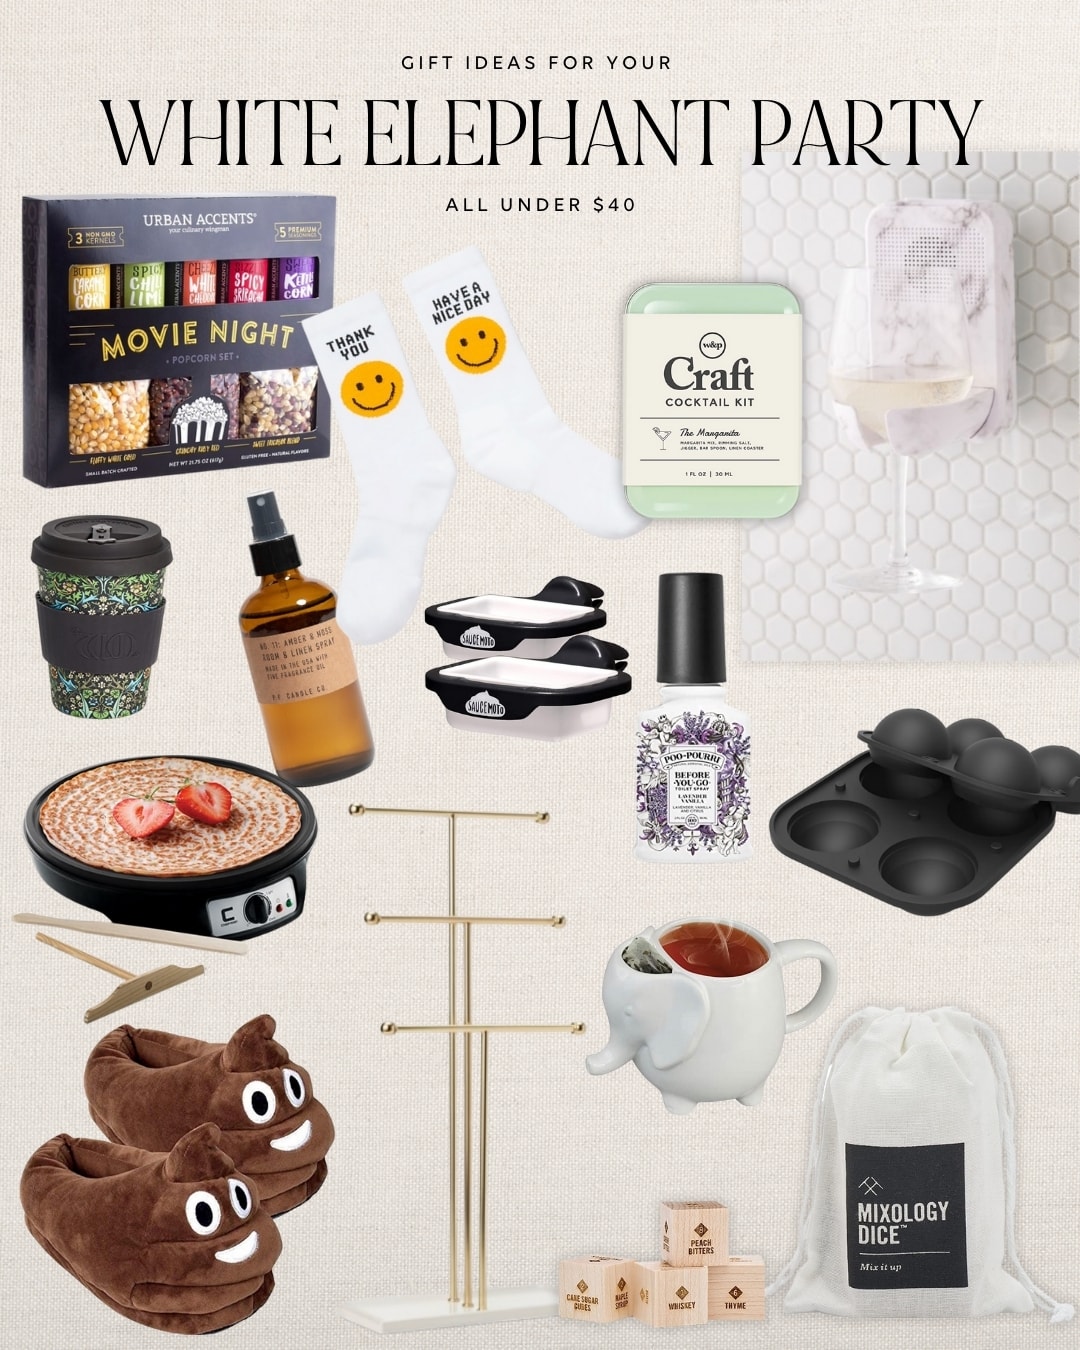 White Elephant Gift Ideas Under $30 - The Gift of Fun  White elephant gifts,  Best white elephant gifts, Elephant gifts